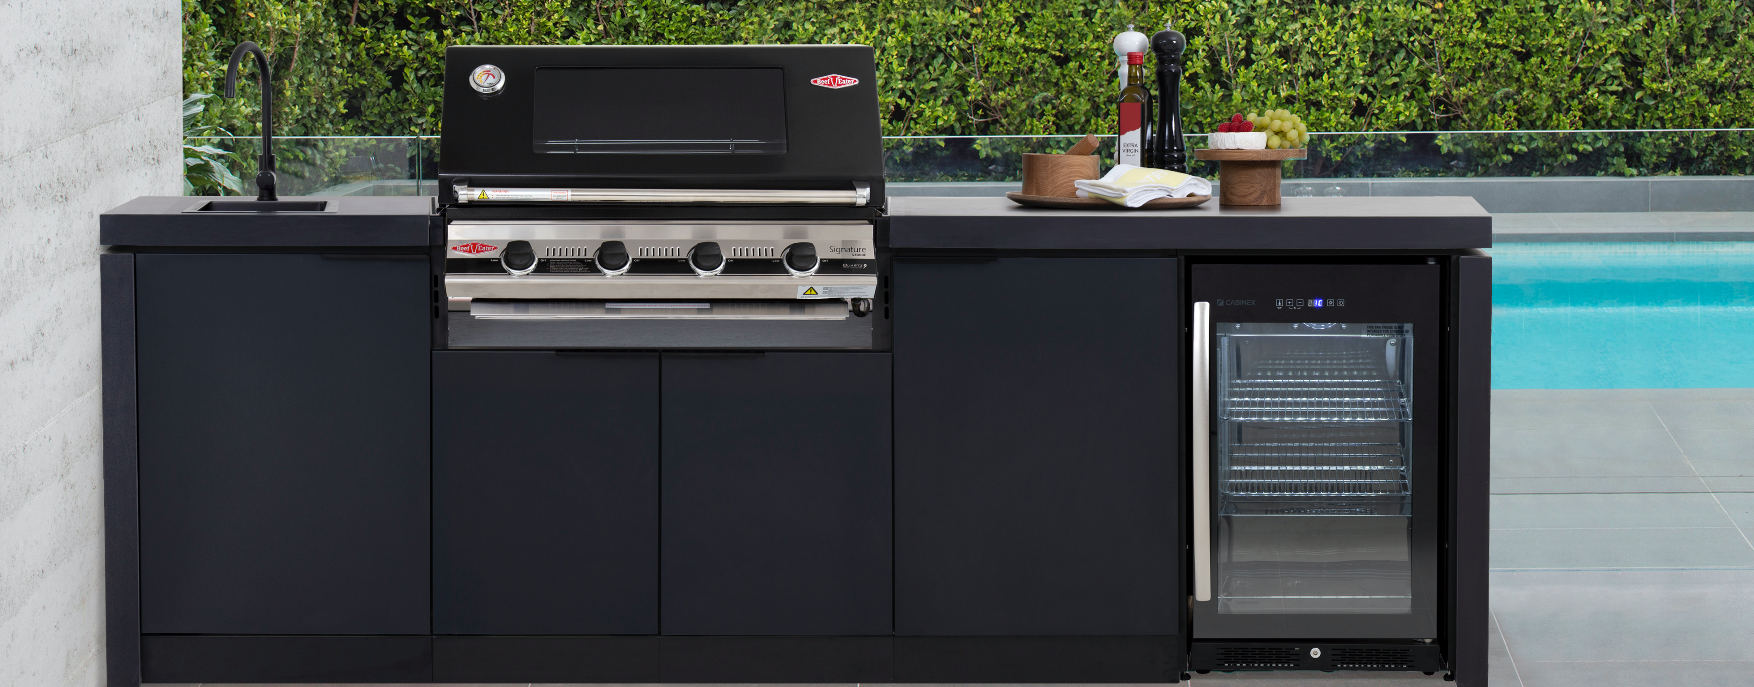 Cabinex Classic Outdoor Kitchen With Beefeater Signature 1600E 5 Burner Gas BBQ